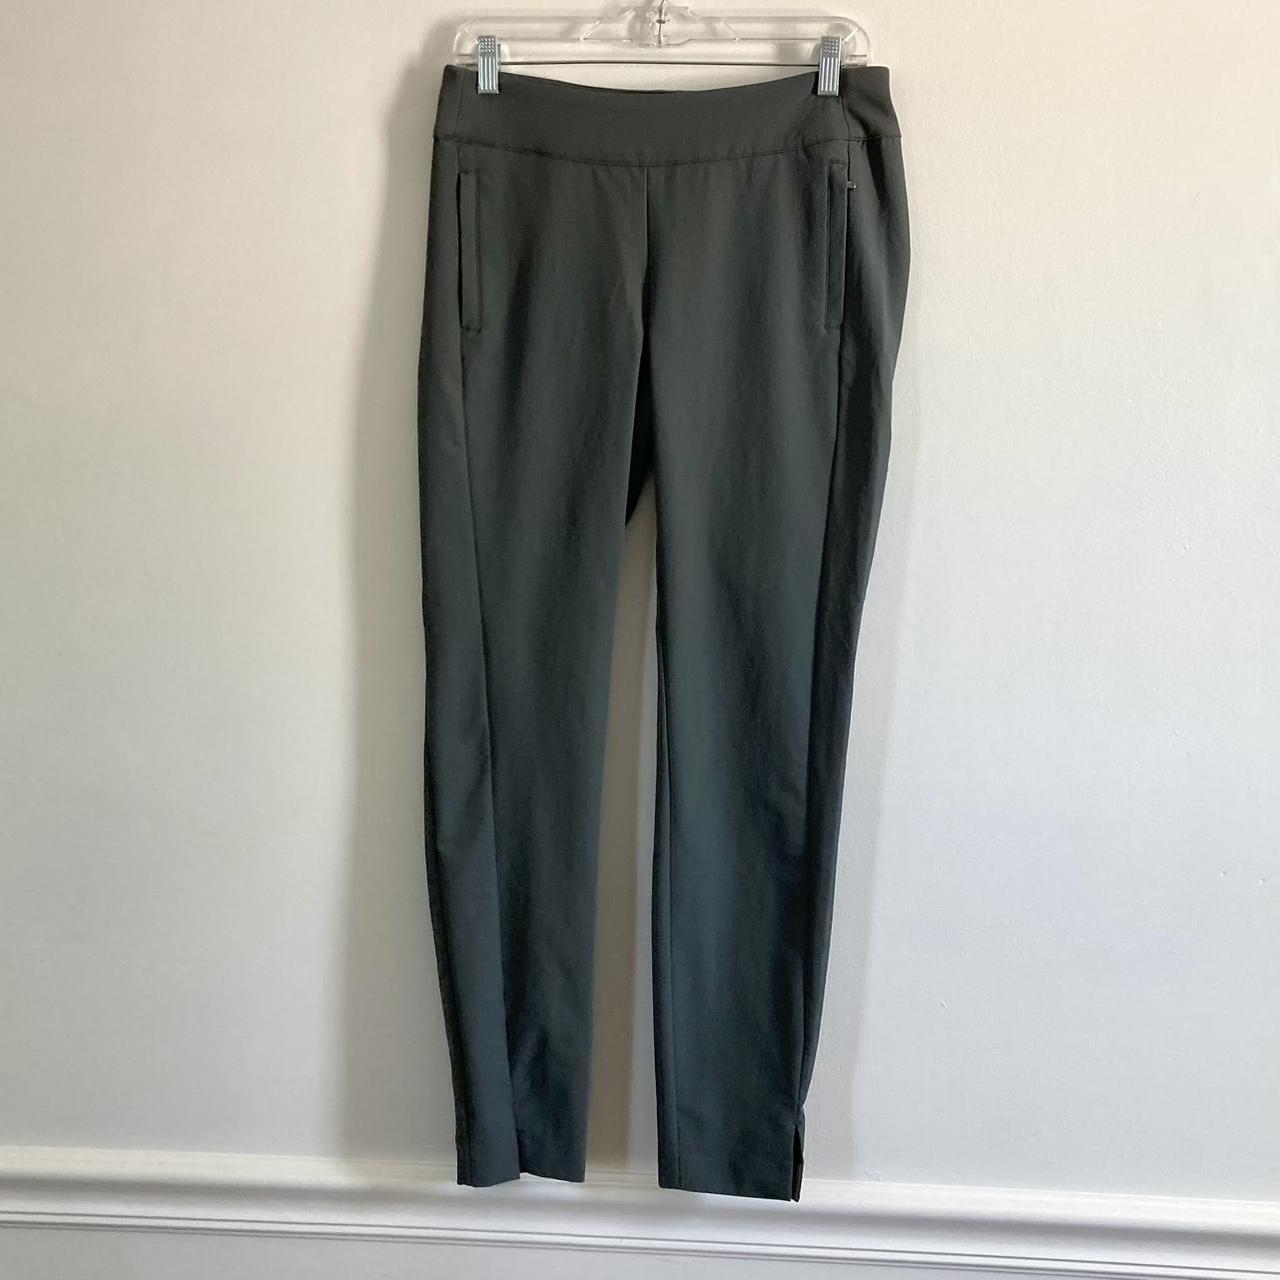 Grayish green cropped athletic pants from Gaiam. - Depop